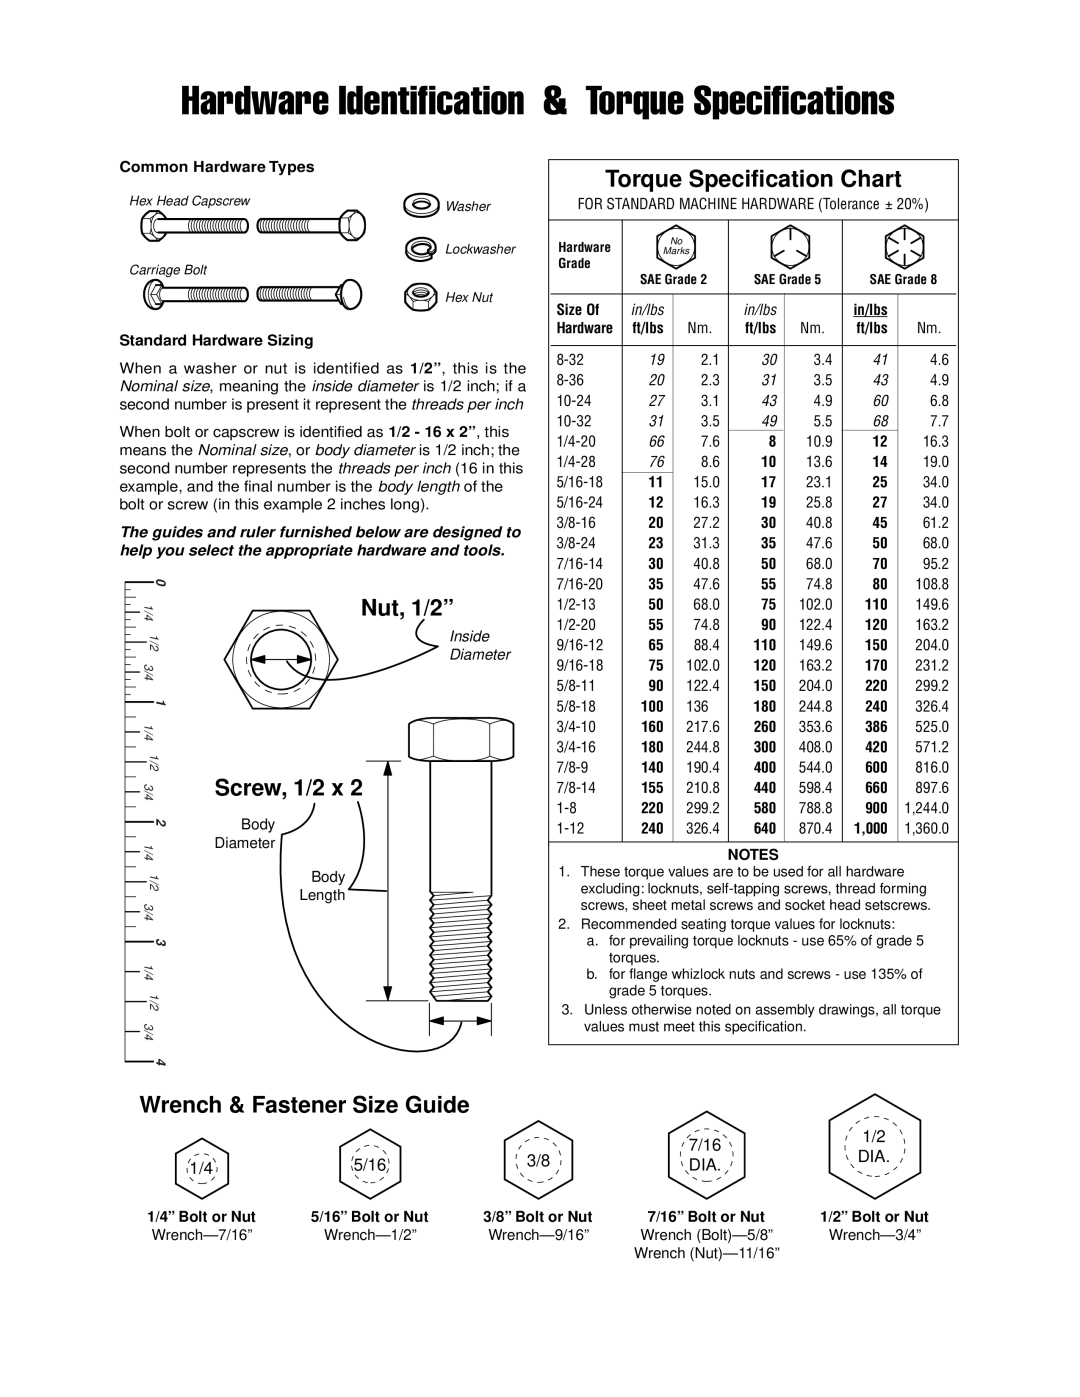 Simplicity Pacer Wrench & Fastener Size Guide, Hardware Identification & Torque Specifications, Torque Specification Chart 